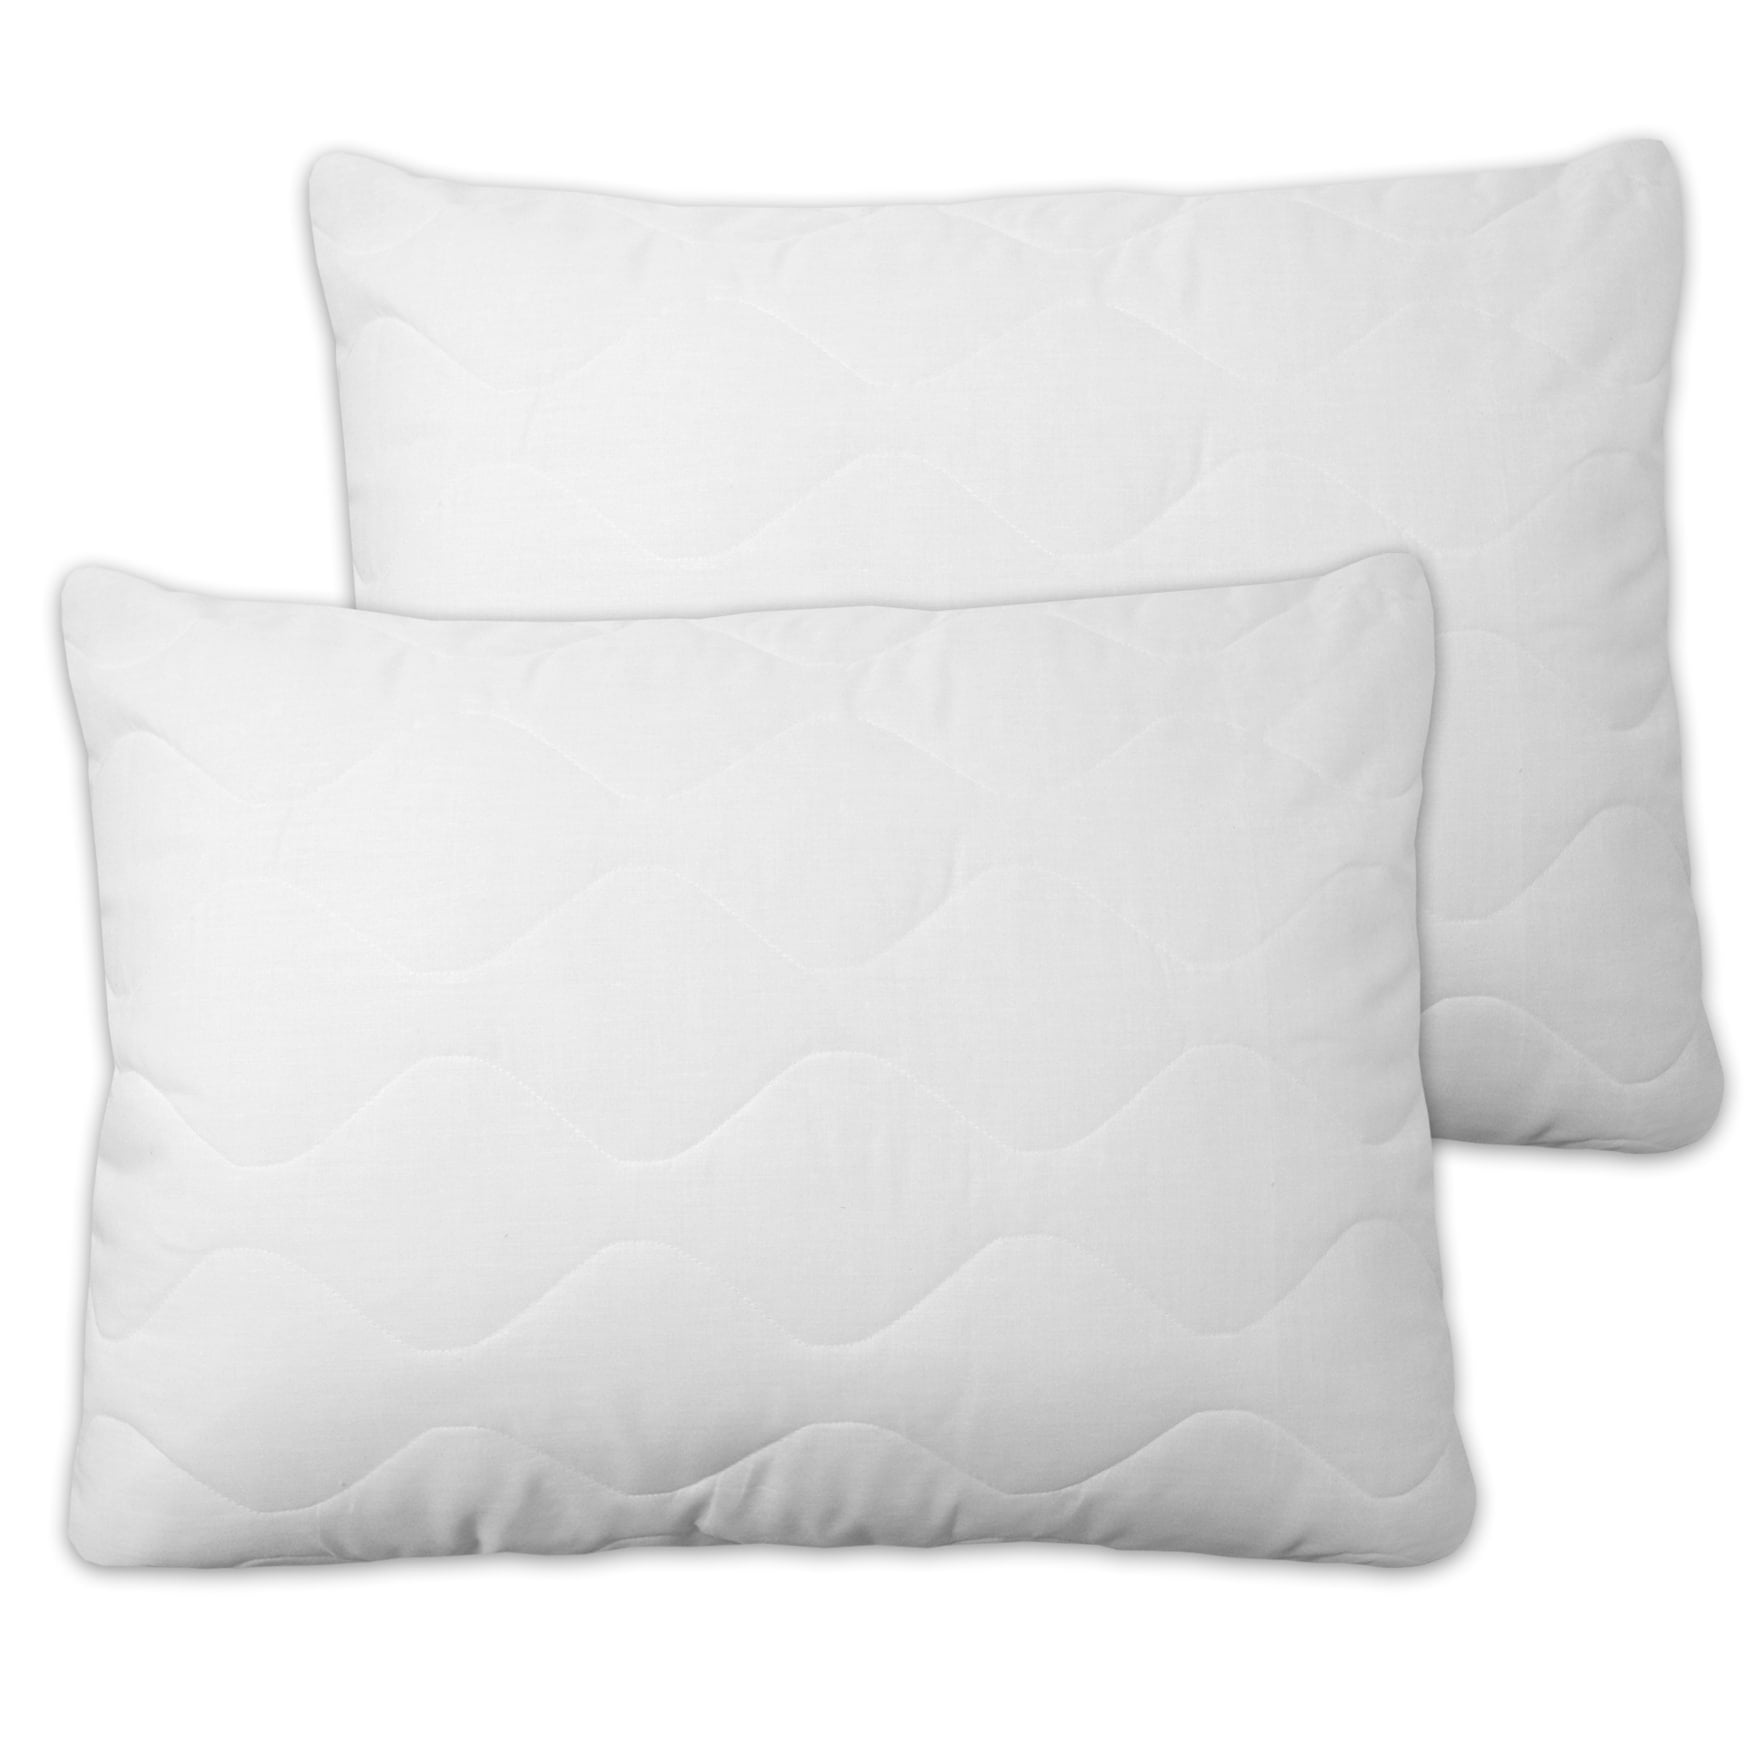 SET OF 2 NEW QUILTED PILLOW COVERS WITH ZIPPERS